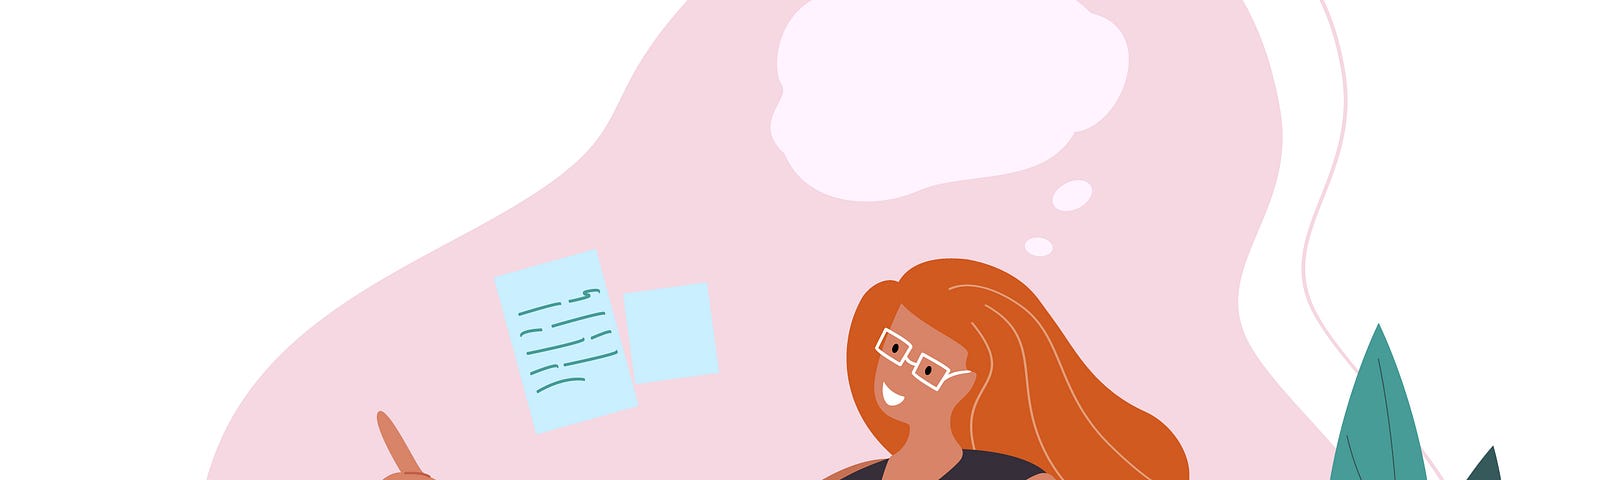 Illustration of woman sitting at a computer with empty thought bubble over her head.